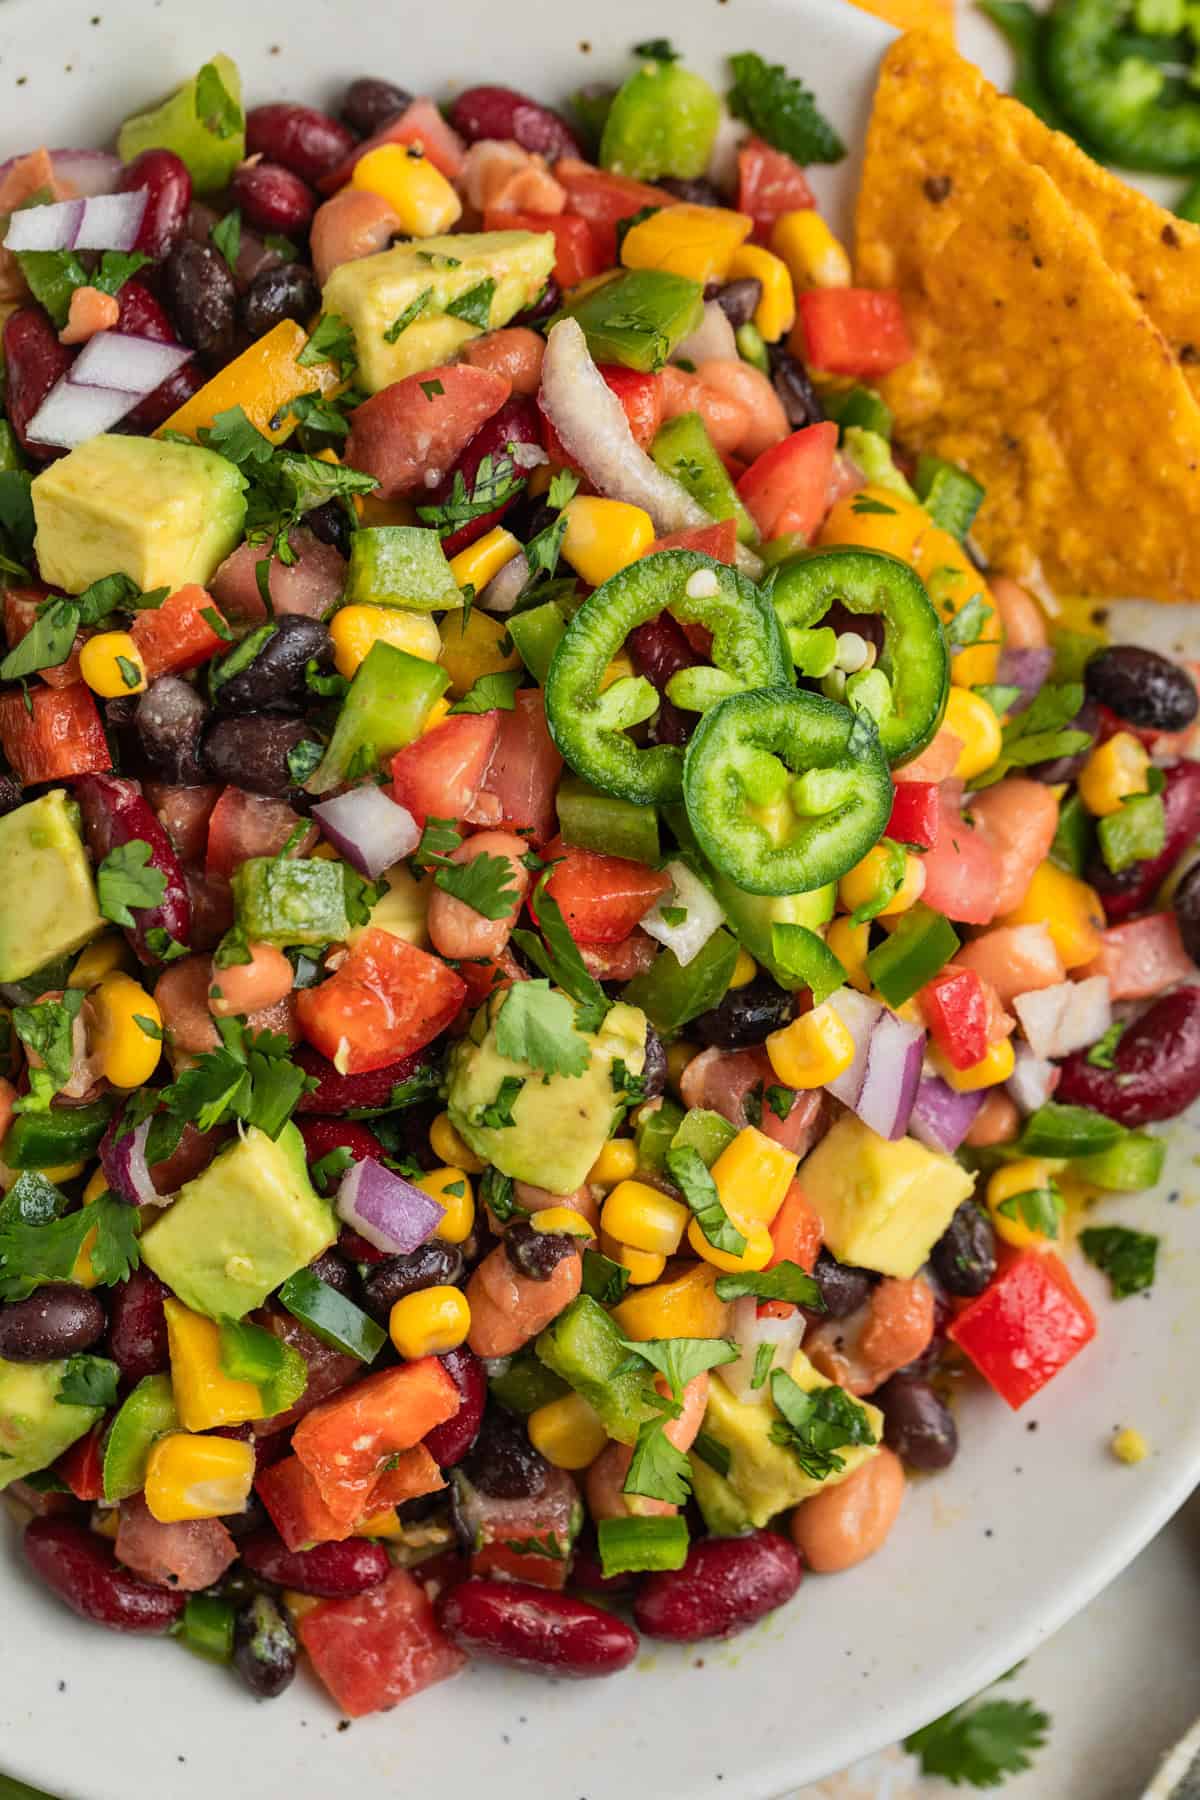 Tri color bean dip with fresh vegetables, corn, cilantro and other ingredients in bowl.